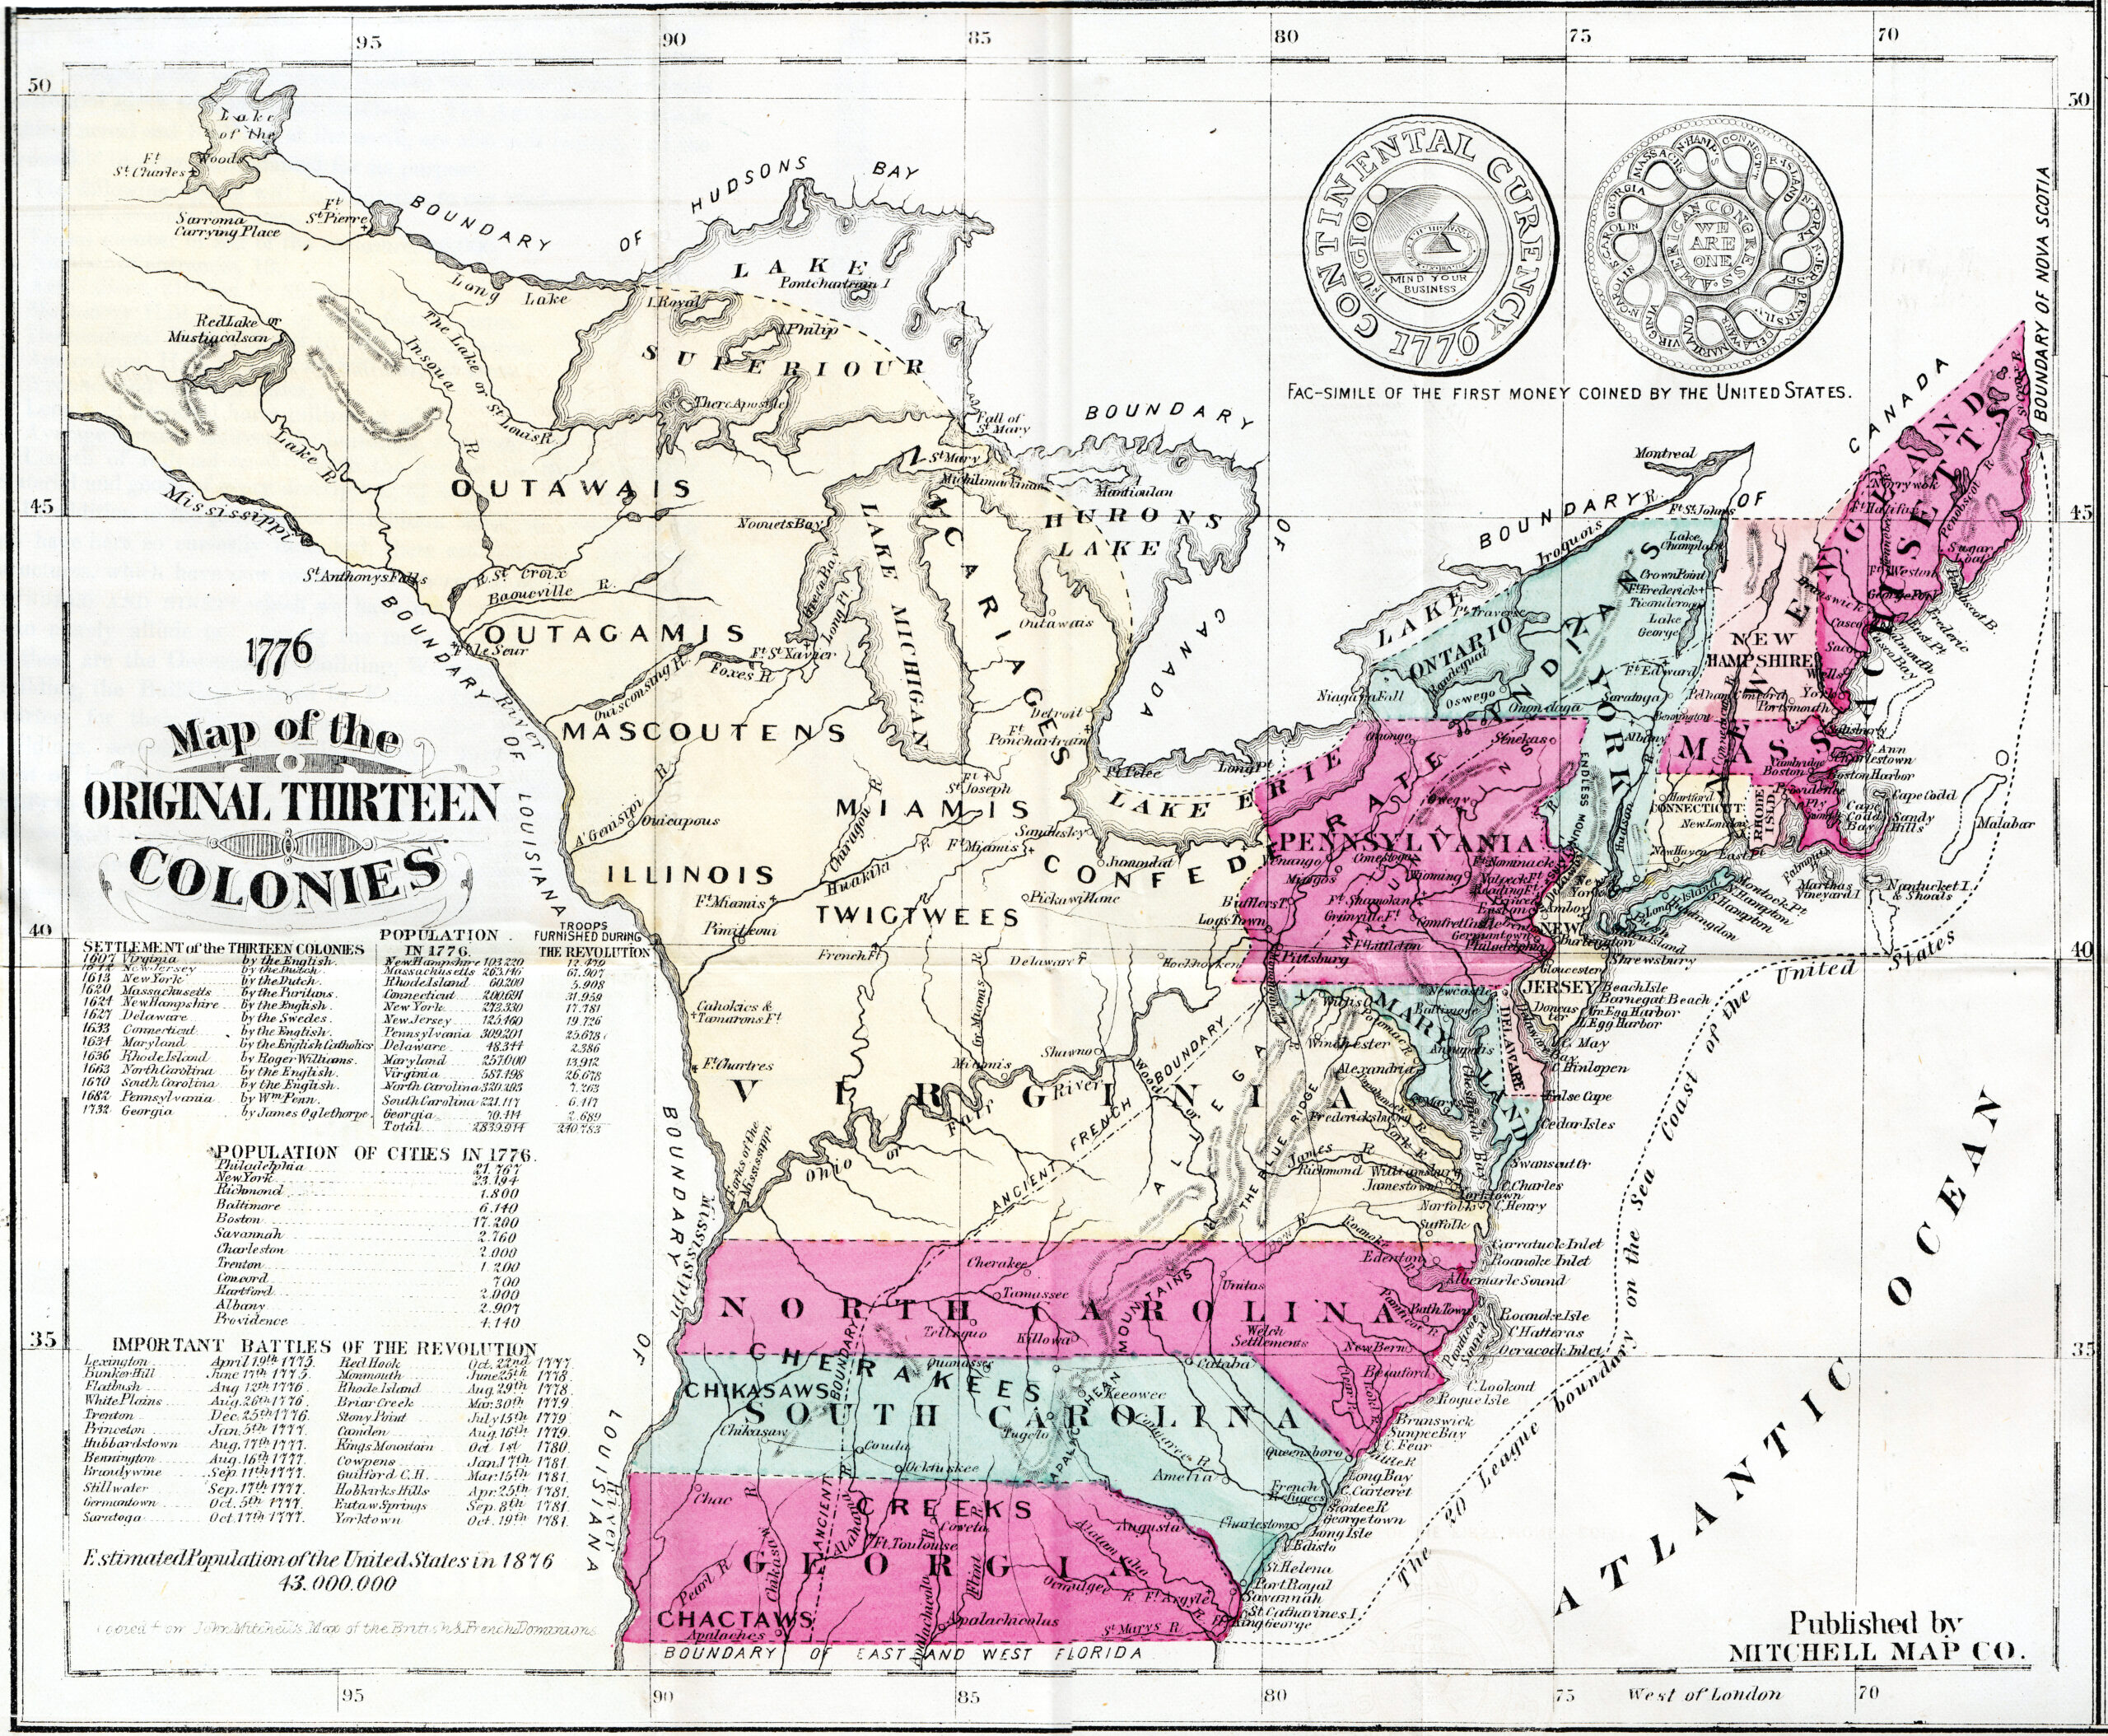 An historic map of the original 13 colonies on the east coast of America: New Hampshire, Massachusetts, Rhode Island, Connecticut, New York, New Jersey, Pennsylvania, Delaware, North Carolina, South Carolina and Delaware